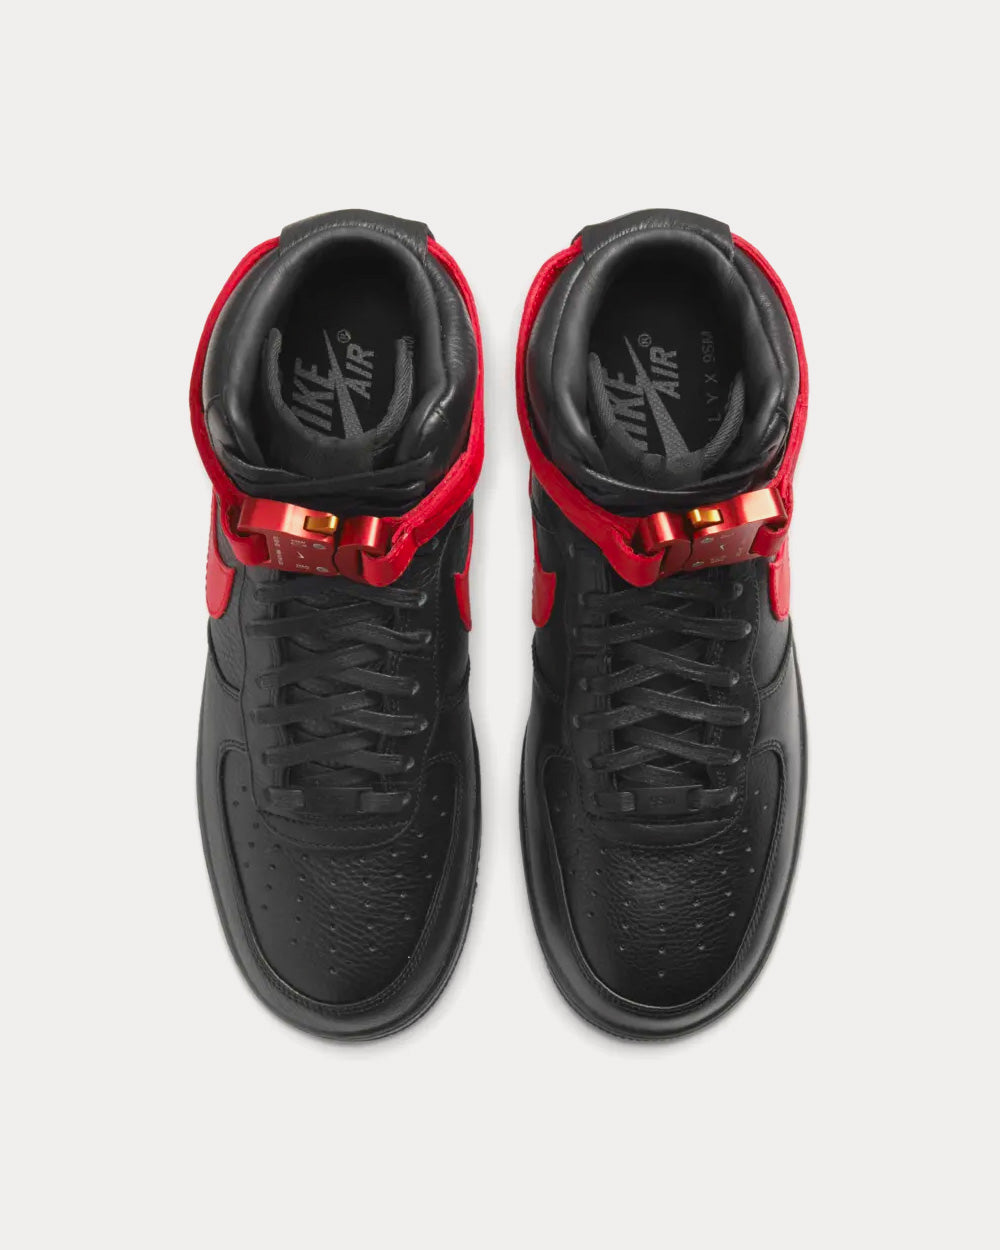 Nike x ALYX - Air Force 1 Black and University Red High Top Sneakers